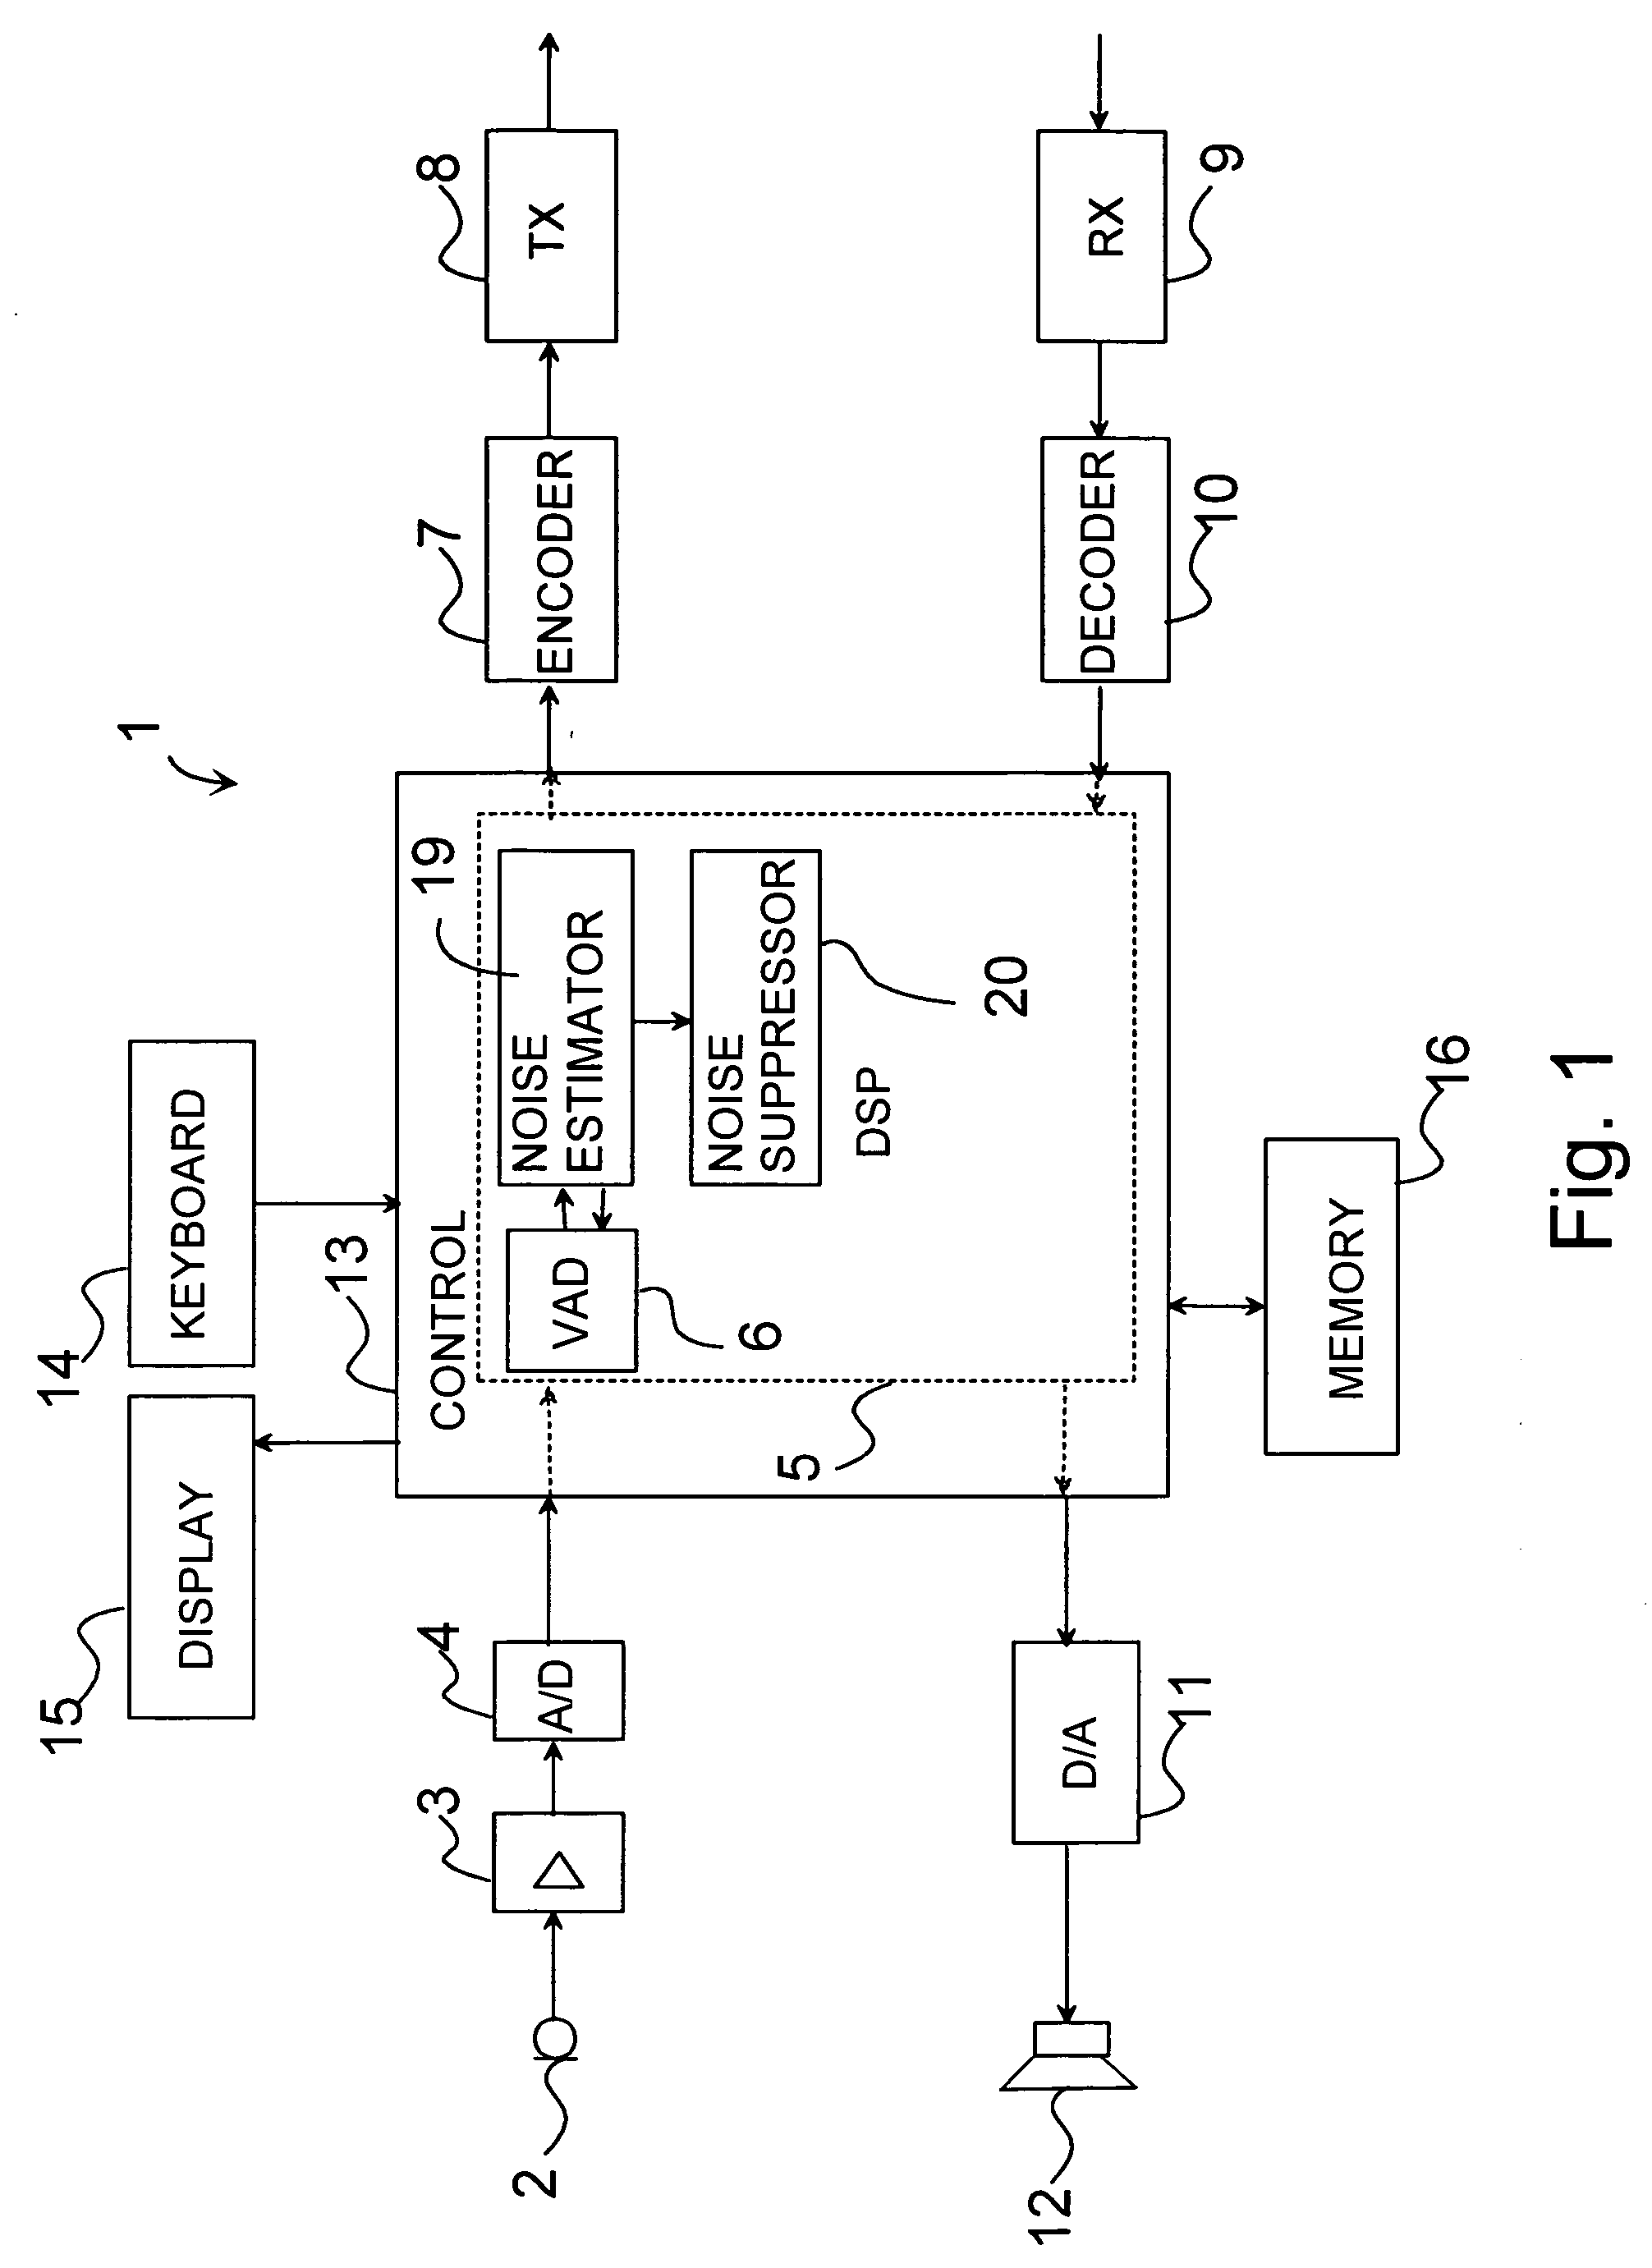 Detection of voice activity in an audio signal